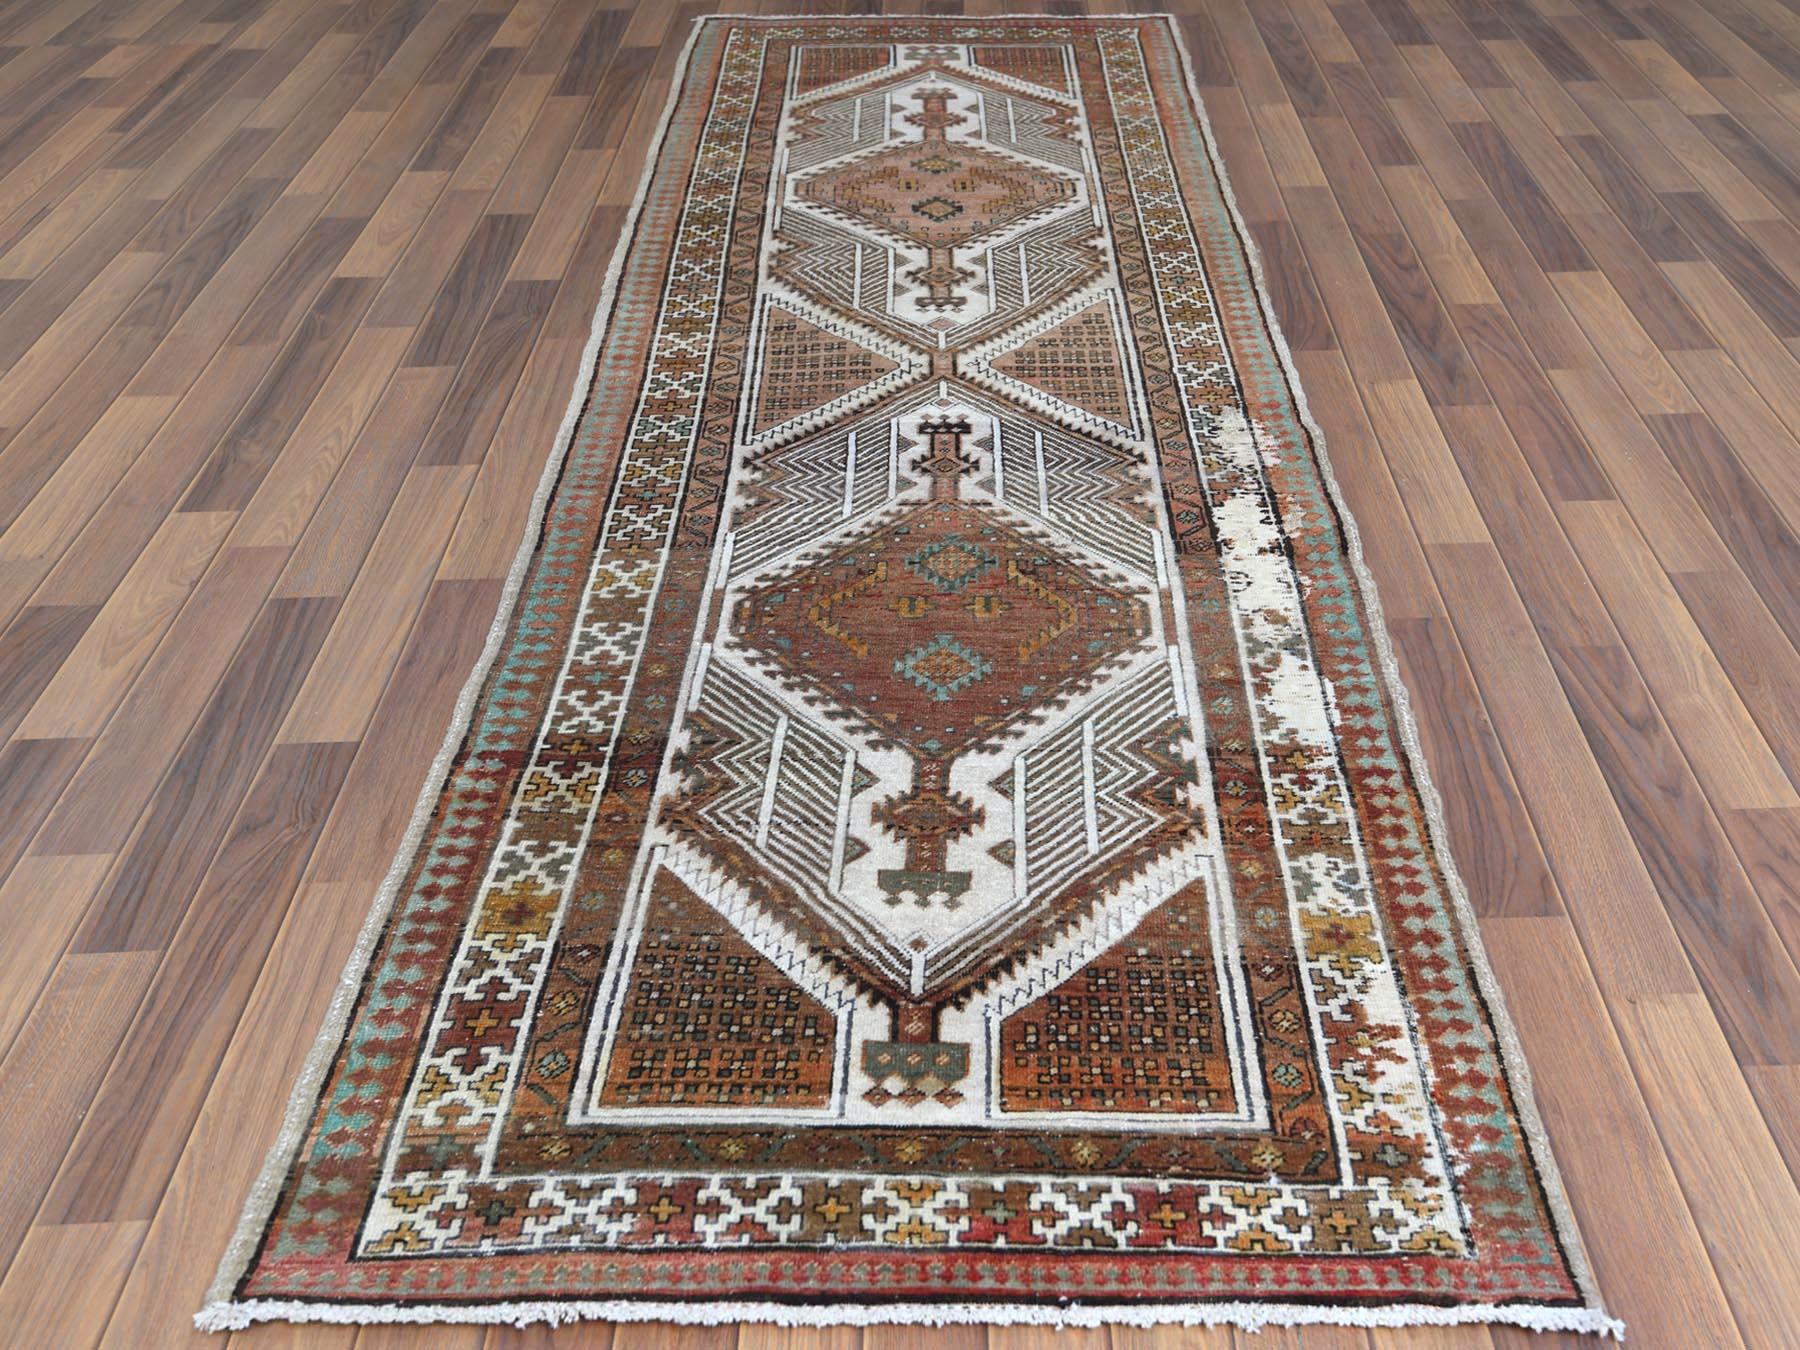 This fabulous hand-knotted carpet has been created and designed for extra strength and durability. This rug has been handcrafted for weeks in the traditional method that is used to make
Exact rug size in feet and inches : 3'5